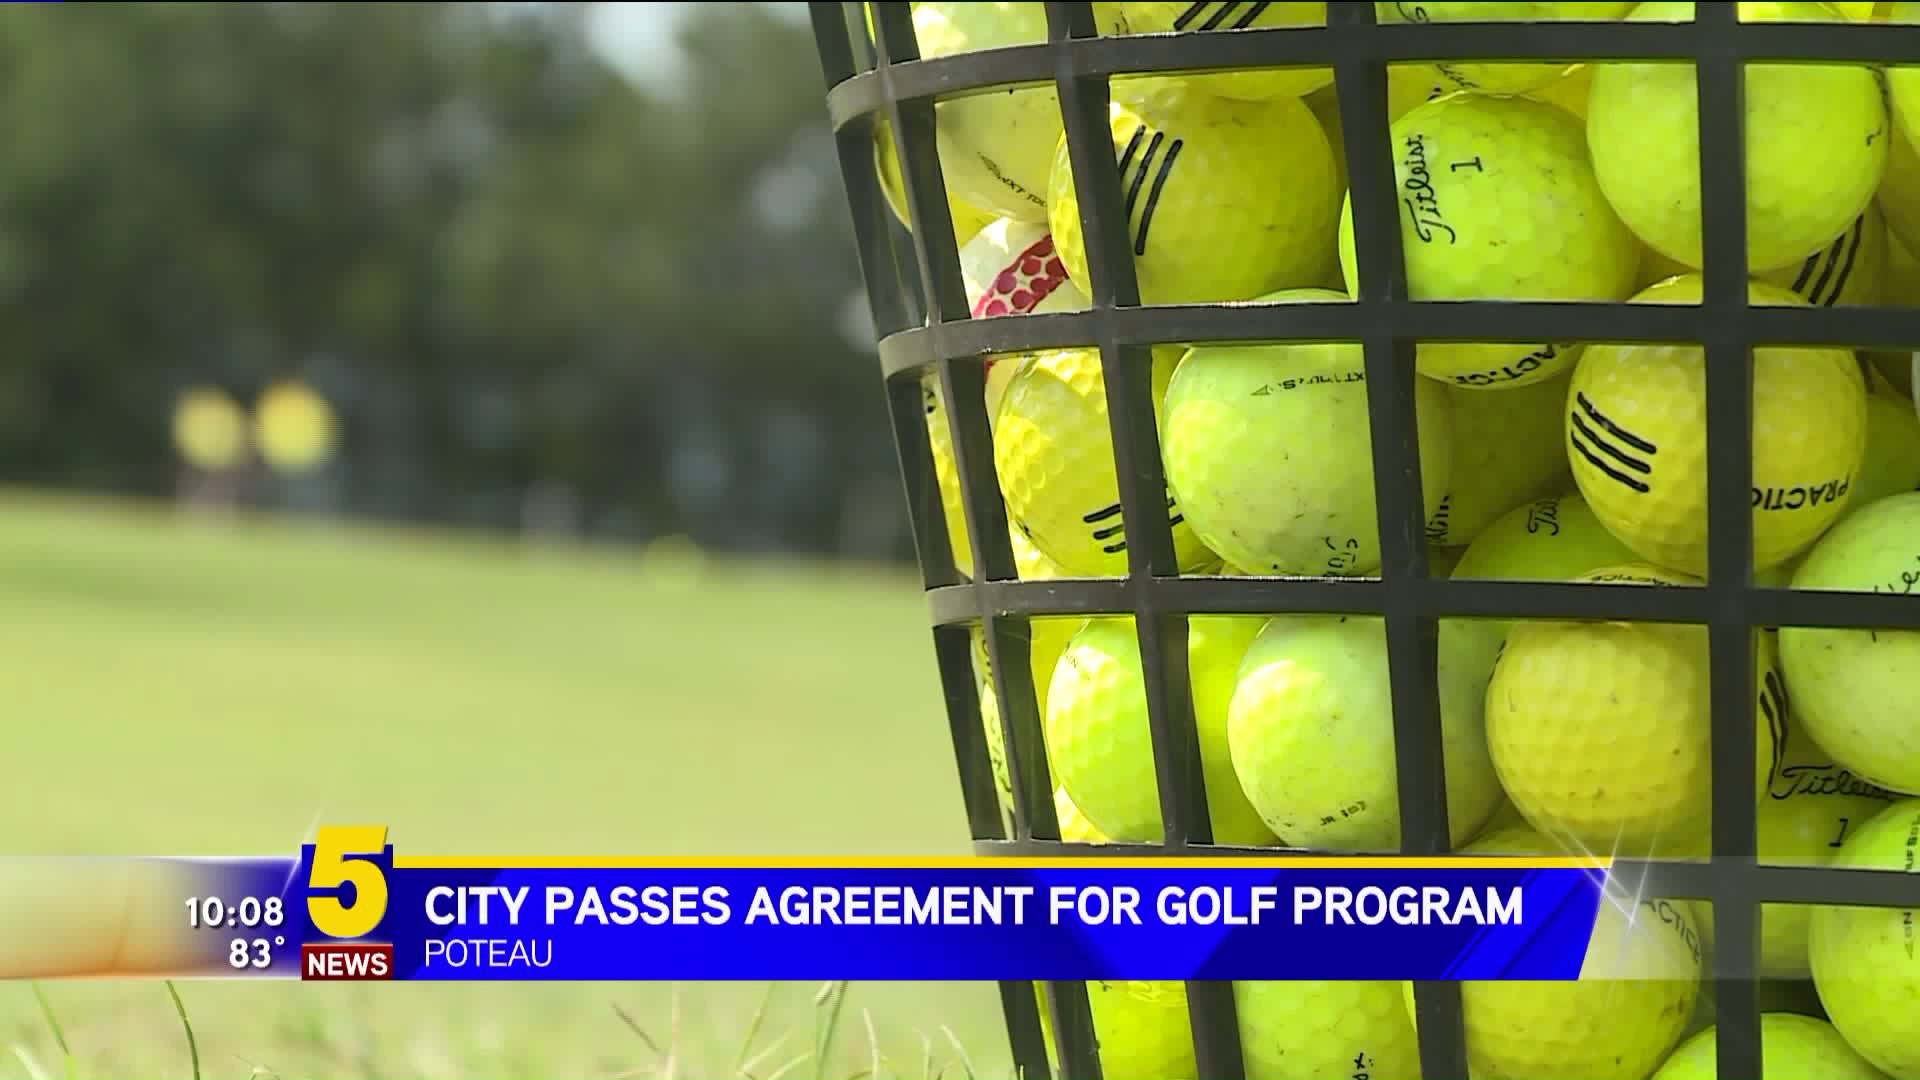 City Passes Agreement For Discounted Golf Program